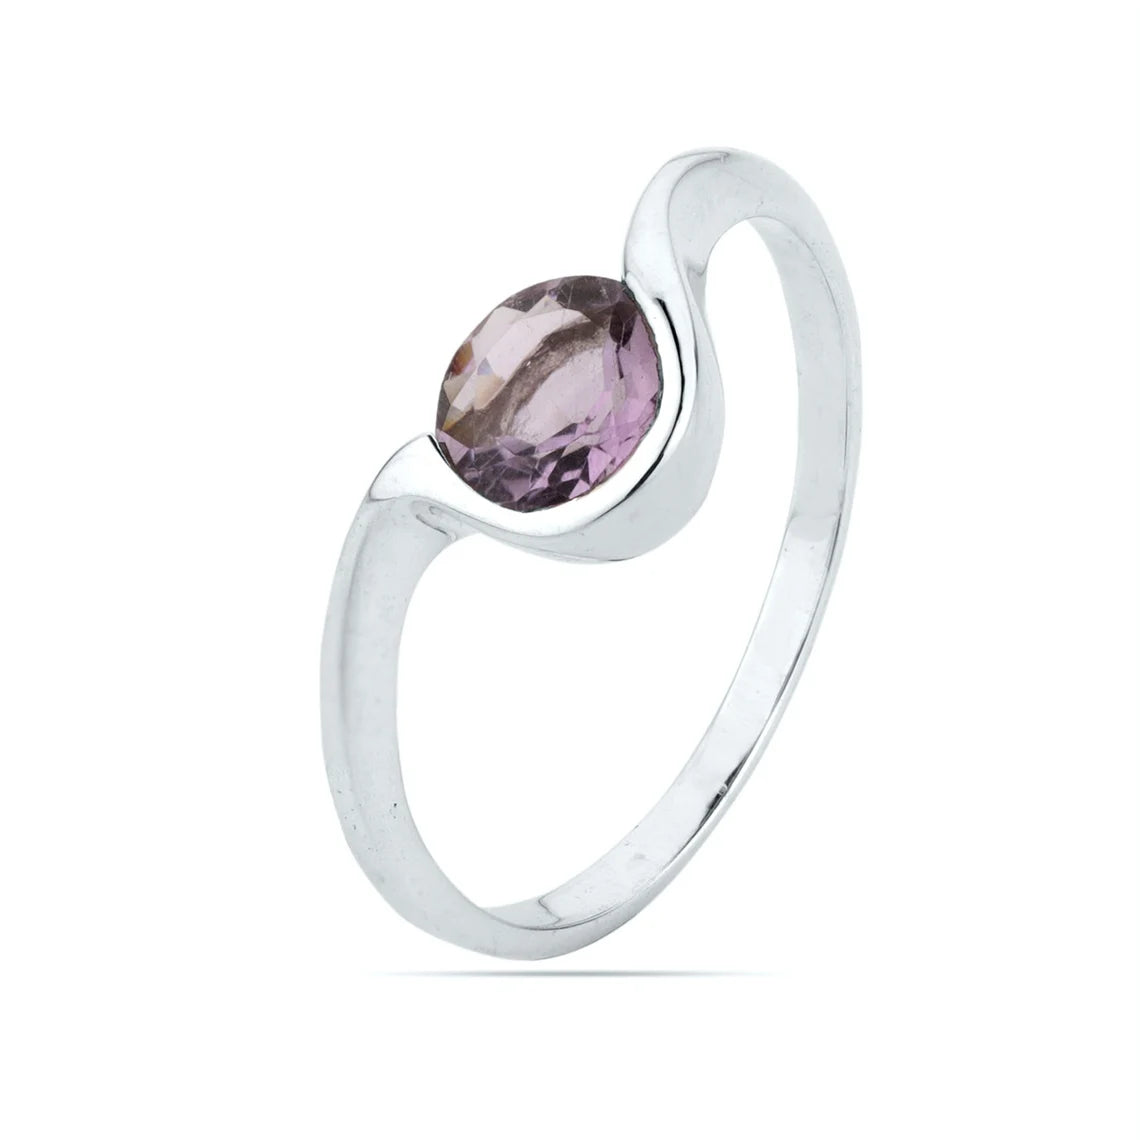 Engagement Ring Natural Amethyst Ring February Birthstone Round Cut Gemstone Sterling Silver Ring Bezel Setting